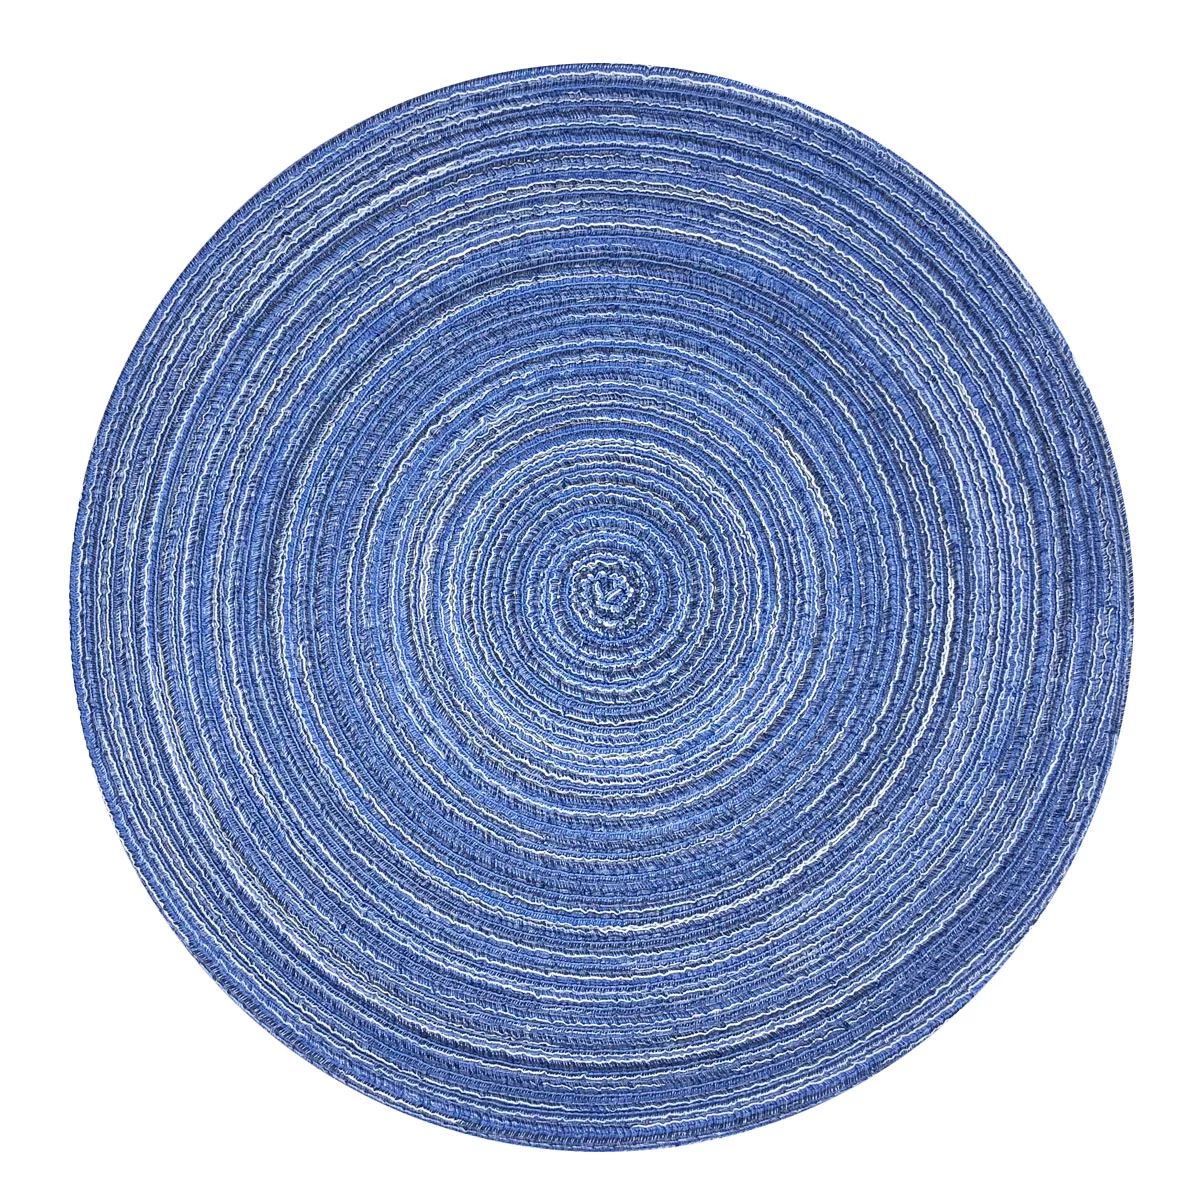 Wrapables® 15" Woven Round Placemats (Set of 6), Blue | Walmart (US)